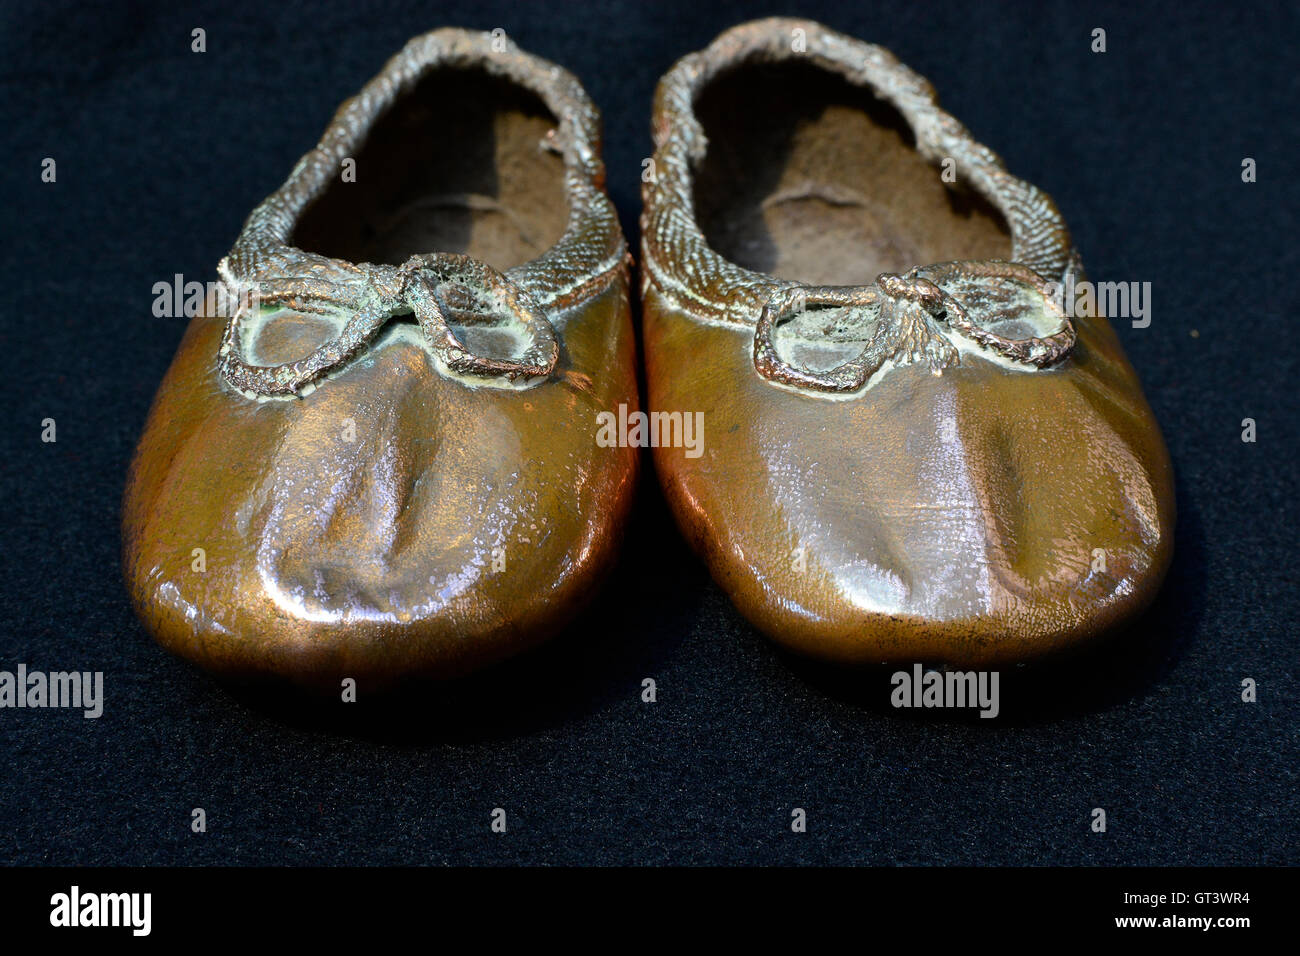 Her first ballet shoes. Copper toddler ballet shoes. Dancing shoes. Baby ballet shoes. Front view. Stock Photo